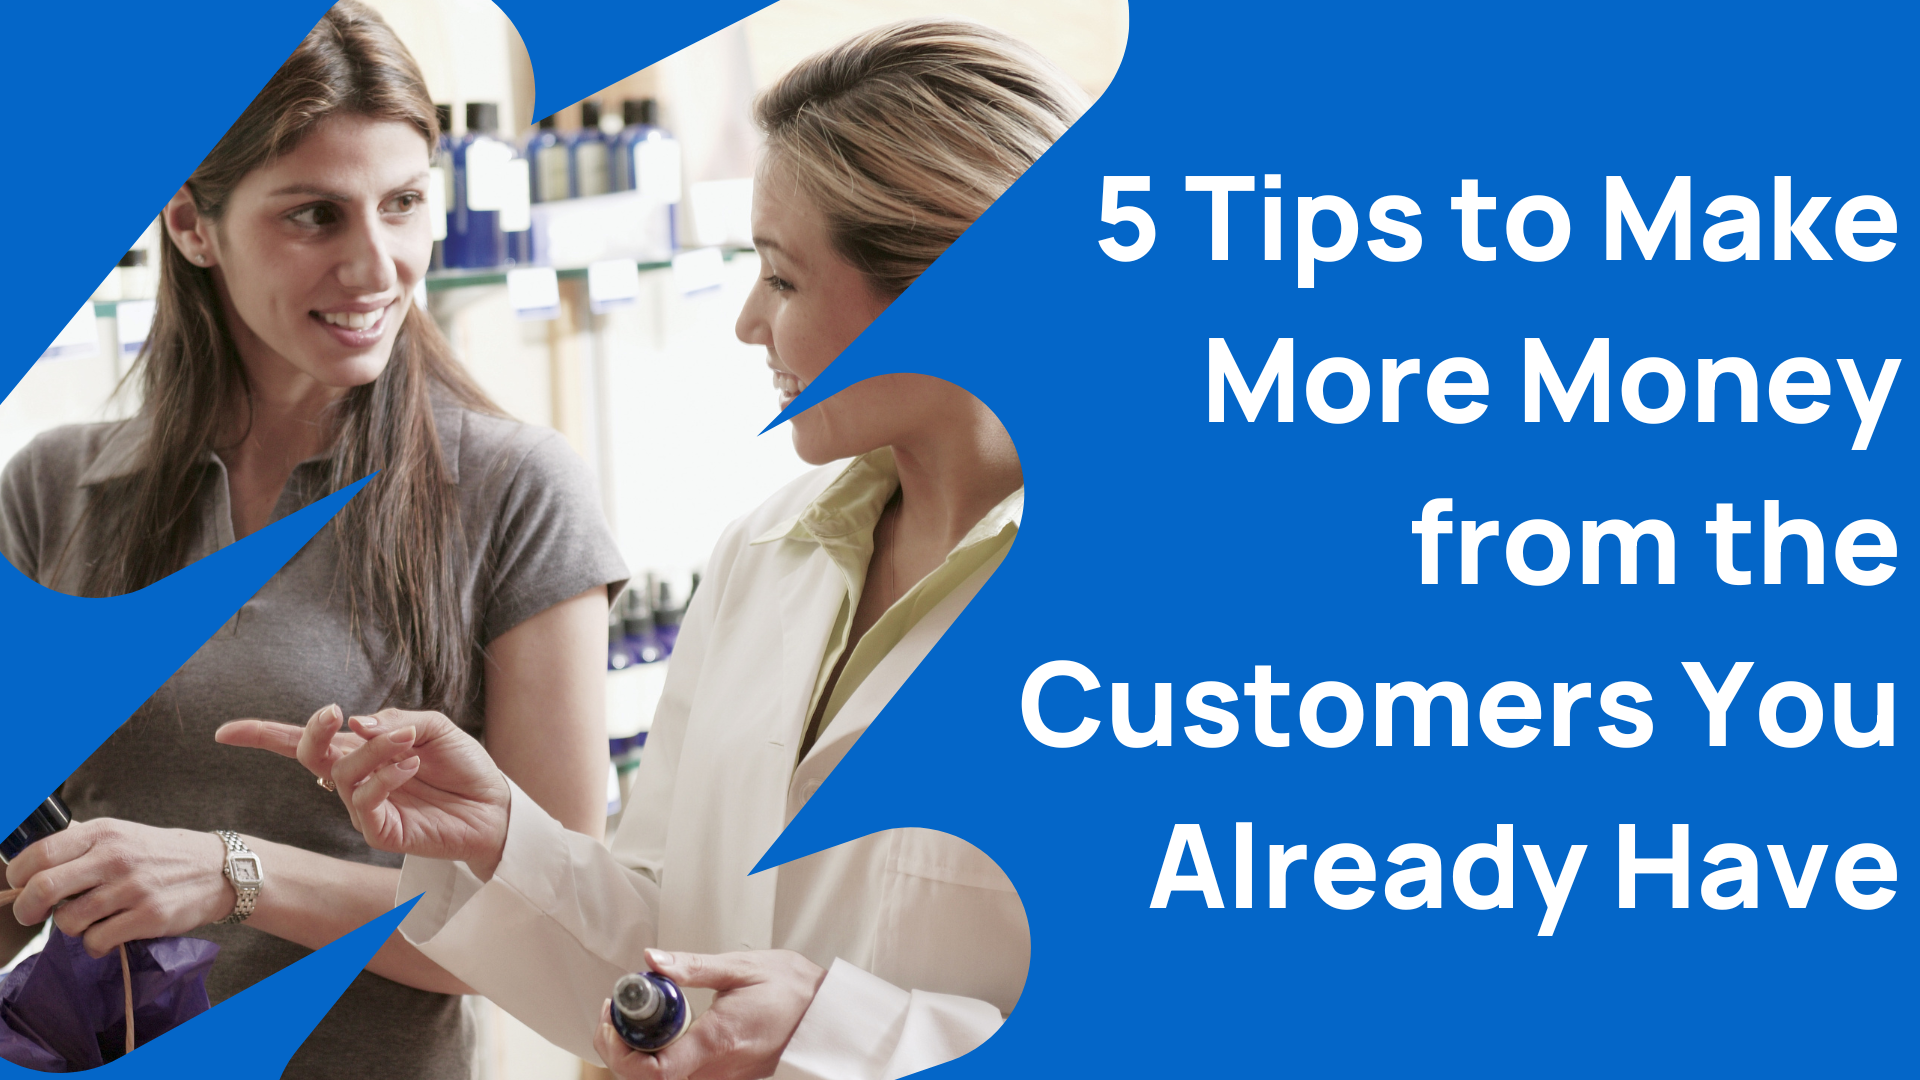 5 Tips to Make More Money from the Customers You Already Have